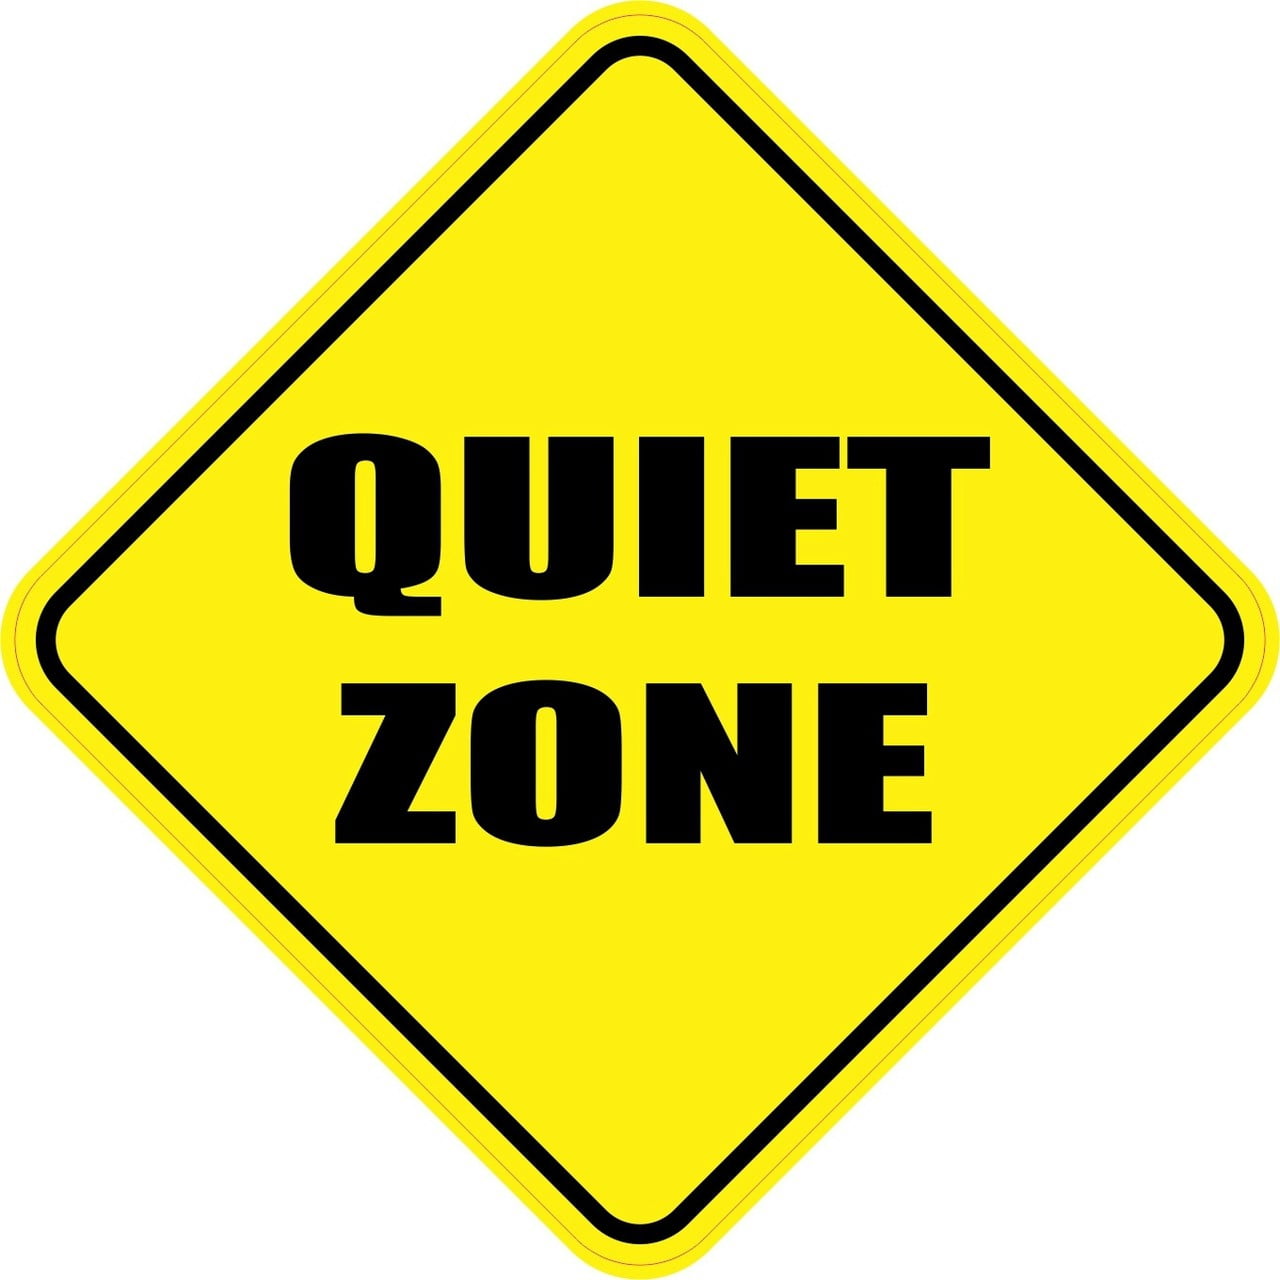 Sssh This Area Is A Quiet Zone Hotels B&B Aluminium Sign 400mm x 270mm x 3mm. 